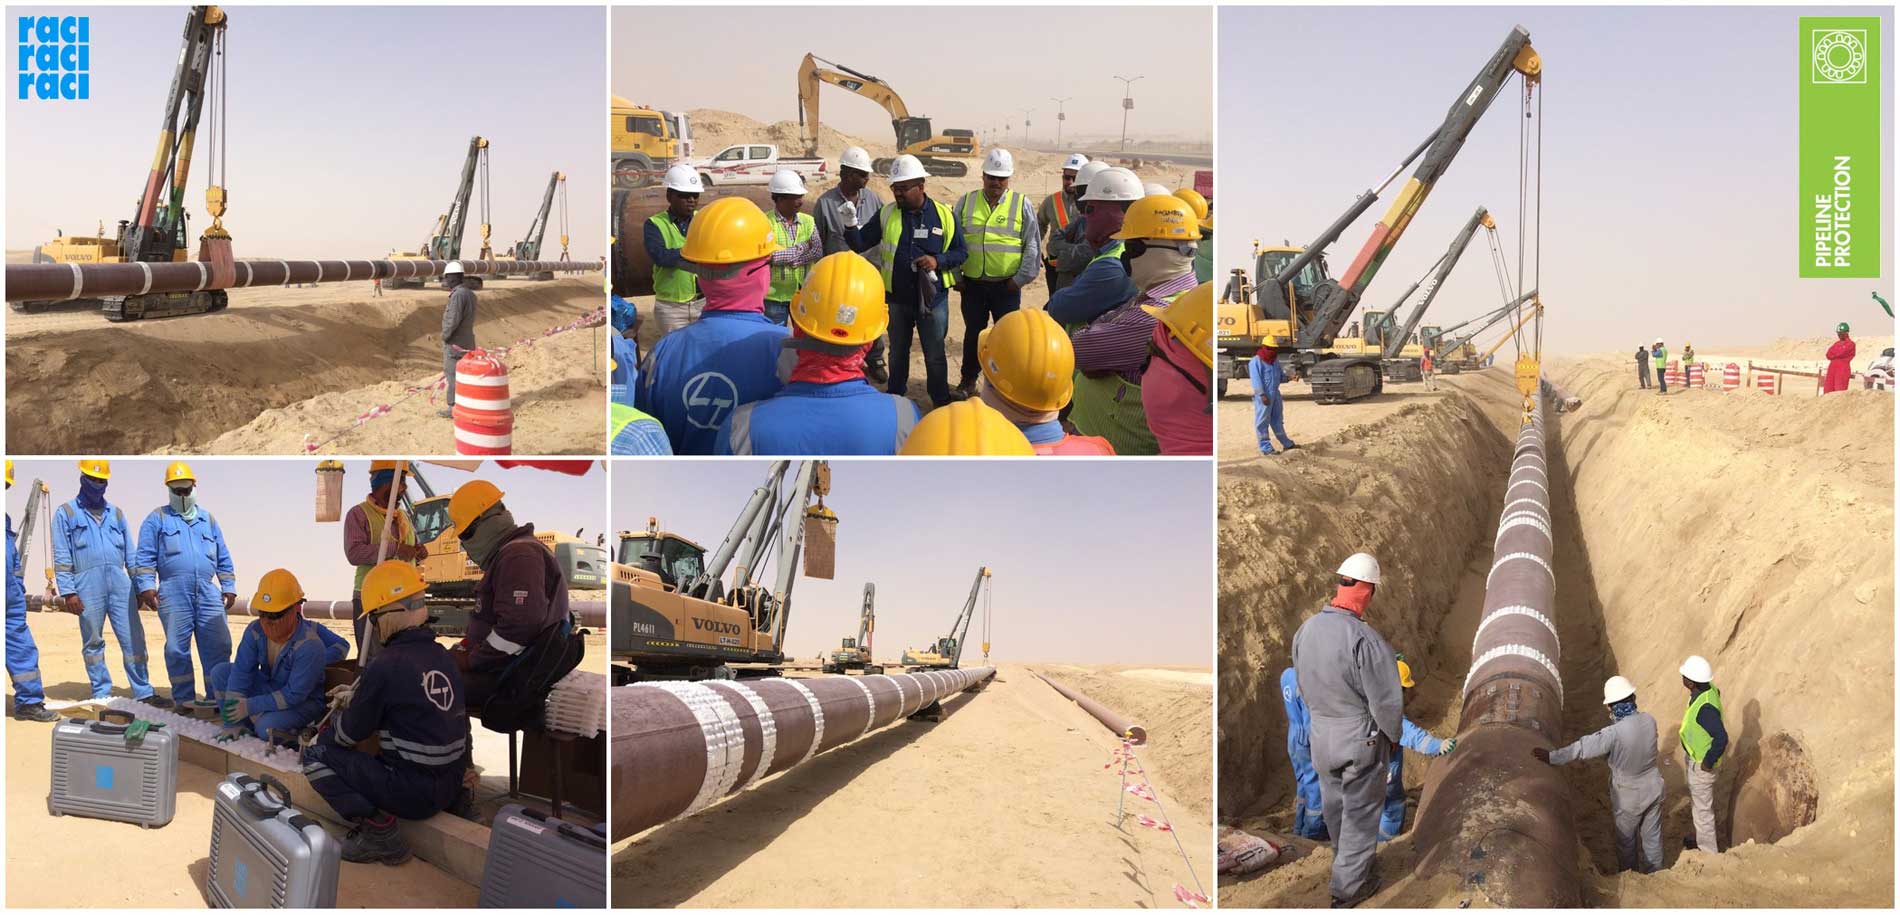 Once again Raci has been selected as partner to complete this Saudi Aramco big project. The installation of our HDPE Spacers CFD25 and CDL25 was supervised by us in the presence of Saudi Aramco Officials.